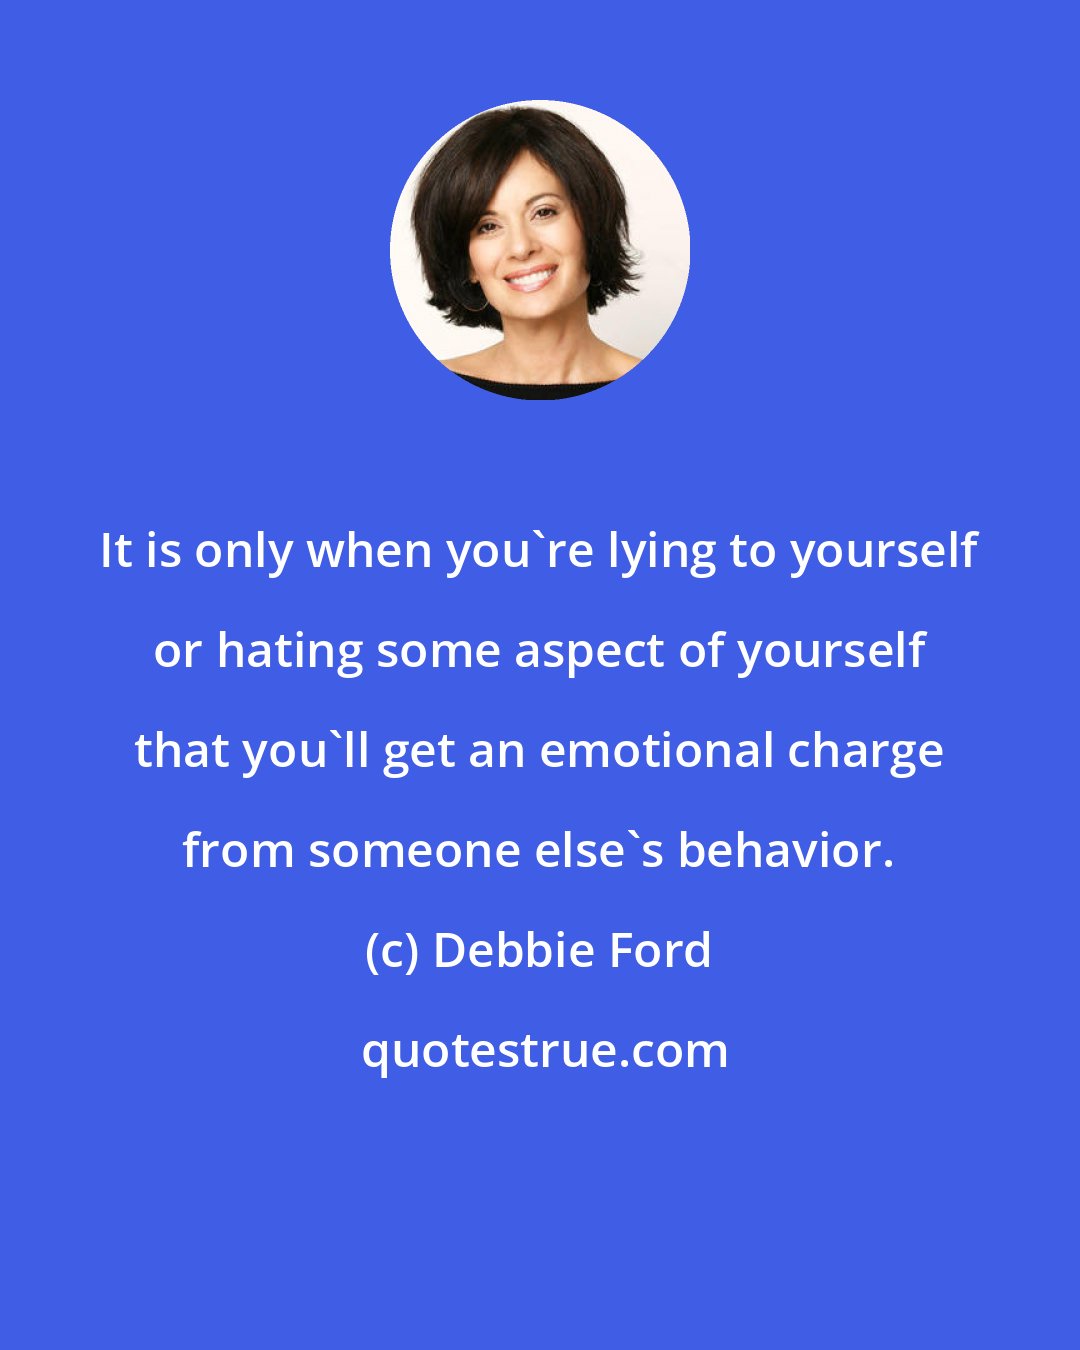 Debbie Ford: It is only when you're lying to yourself or hating some aspect of yourself that you'll get an emotional charge from someone else's behavior.